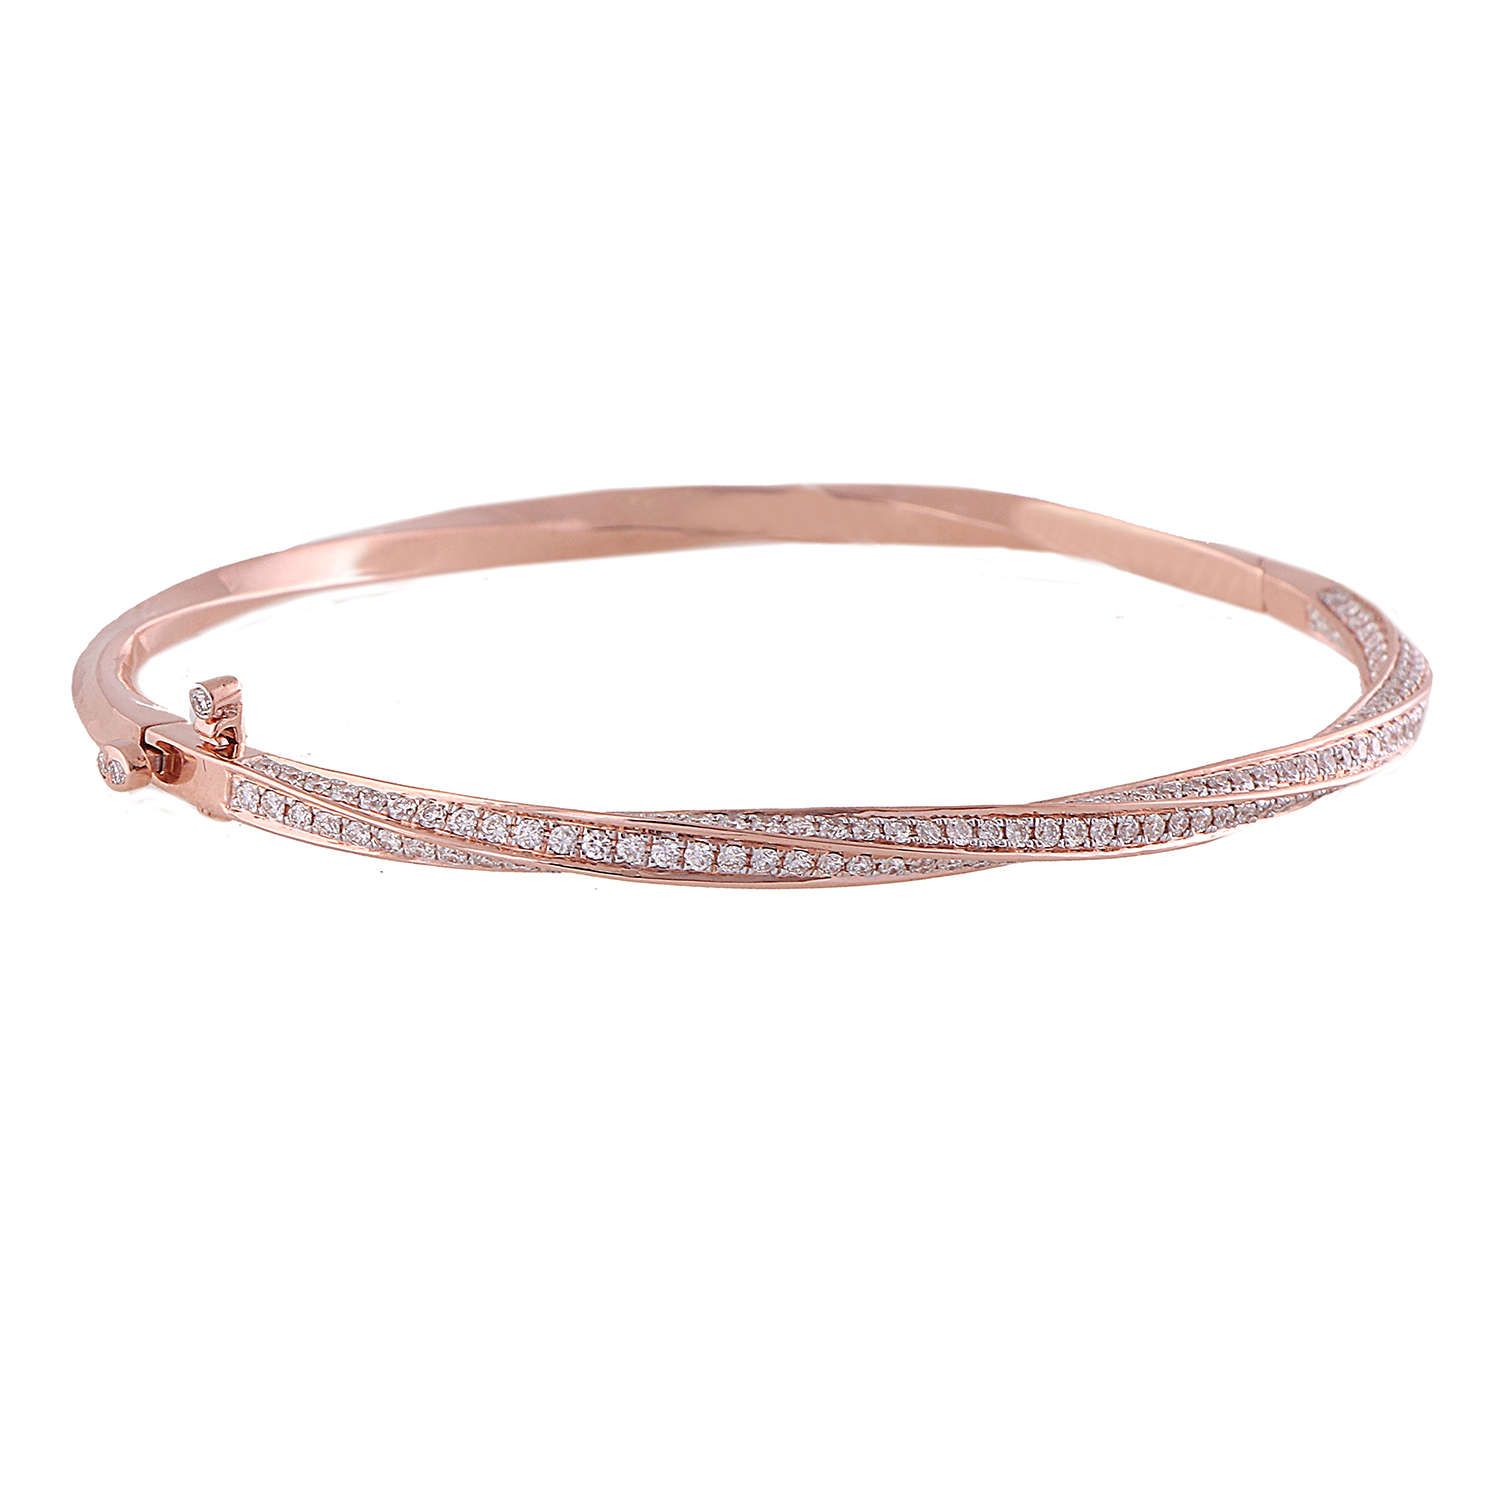 Aggregate more than 85 rose gold with diamond bracelet super hot - in ...